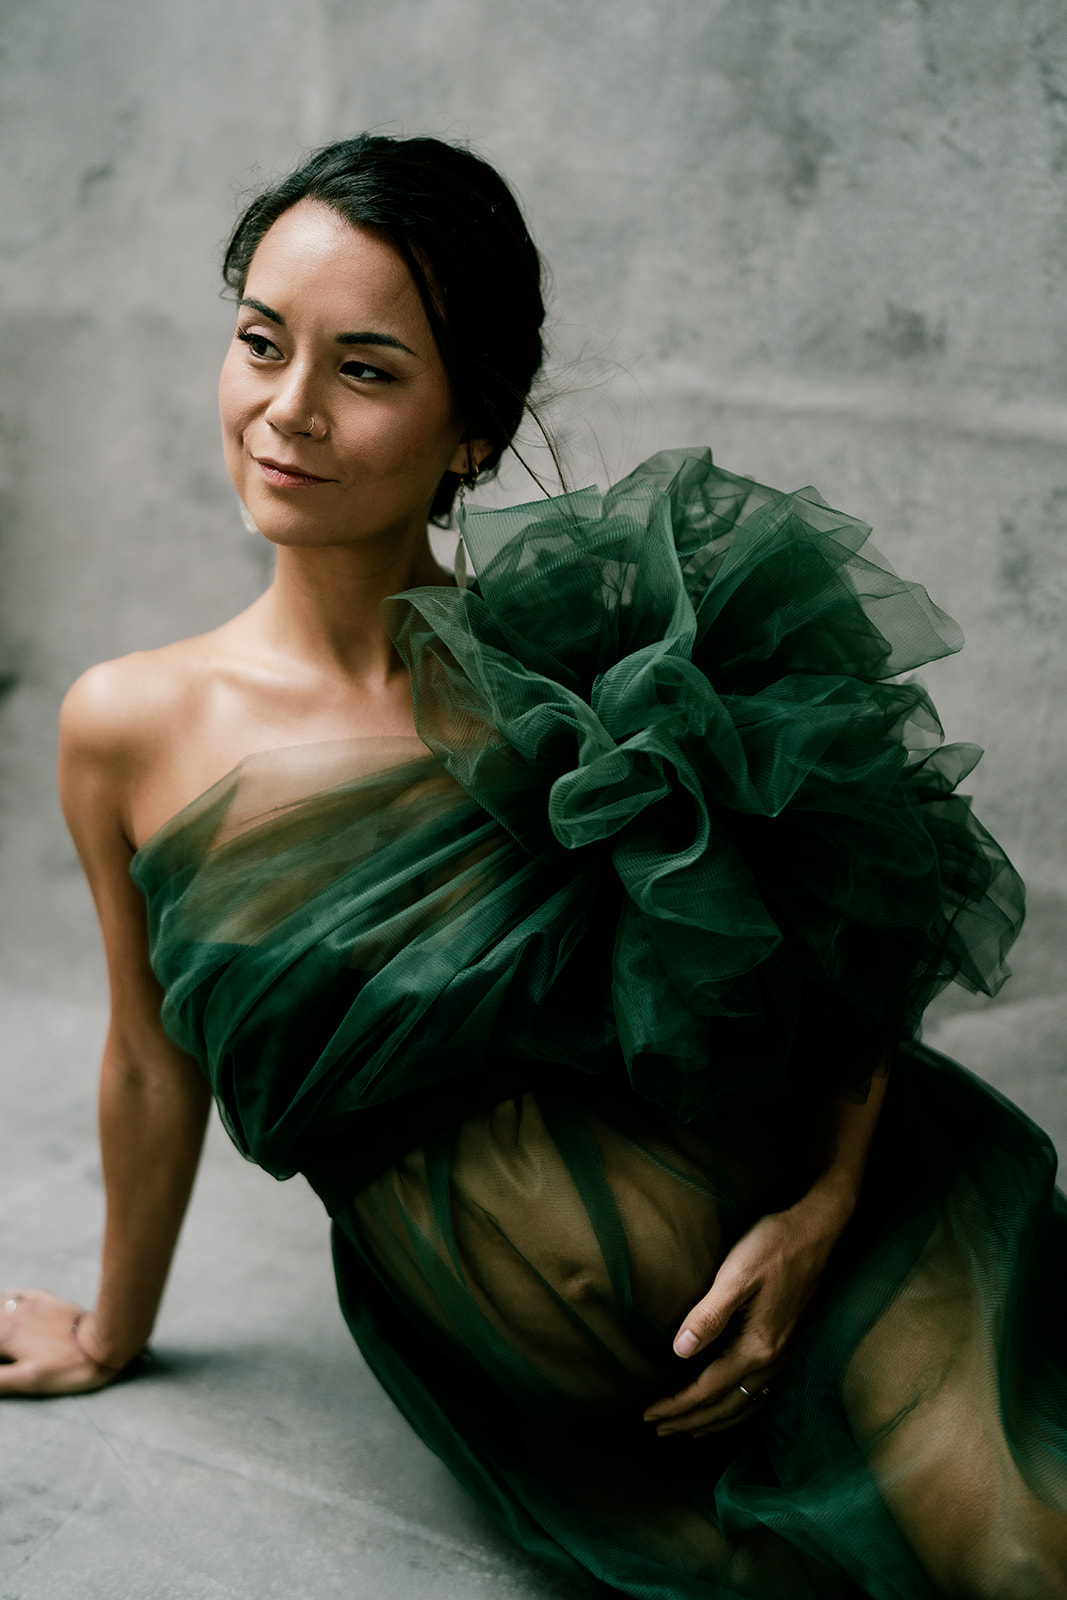 A woman in a green dress posing on a concrete floor.